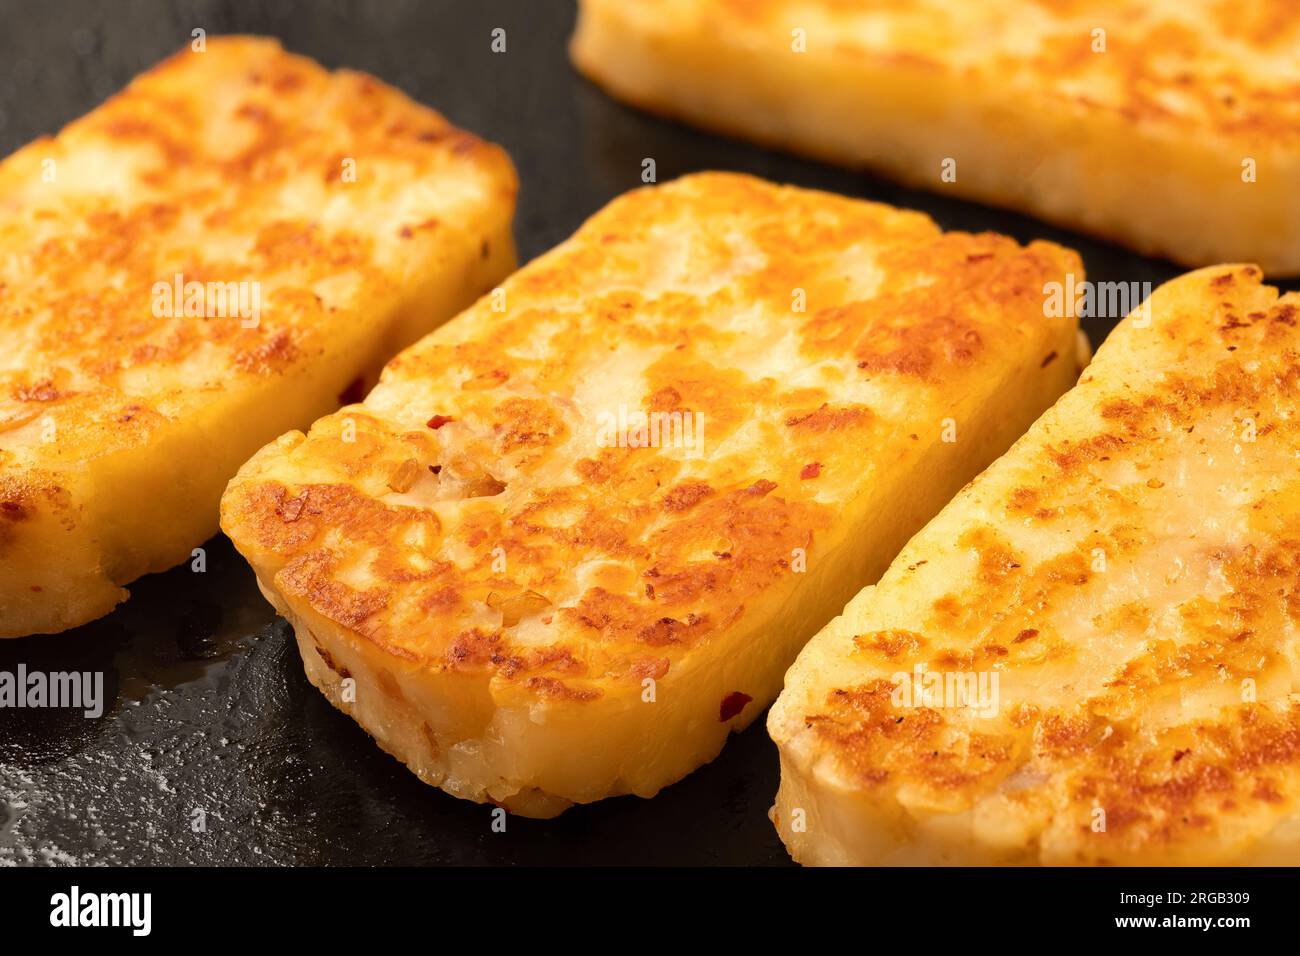 Detail of fried slices of halloumi cheese with red chilli on black frying pan. Stock Photo